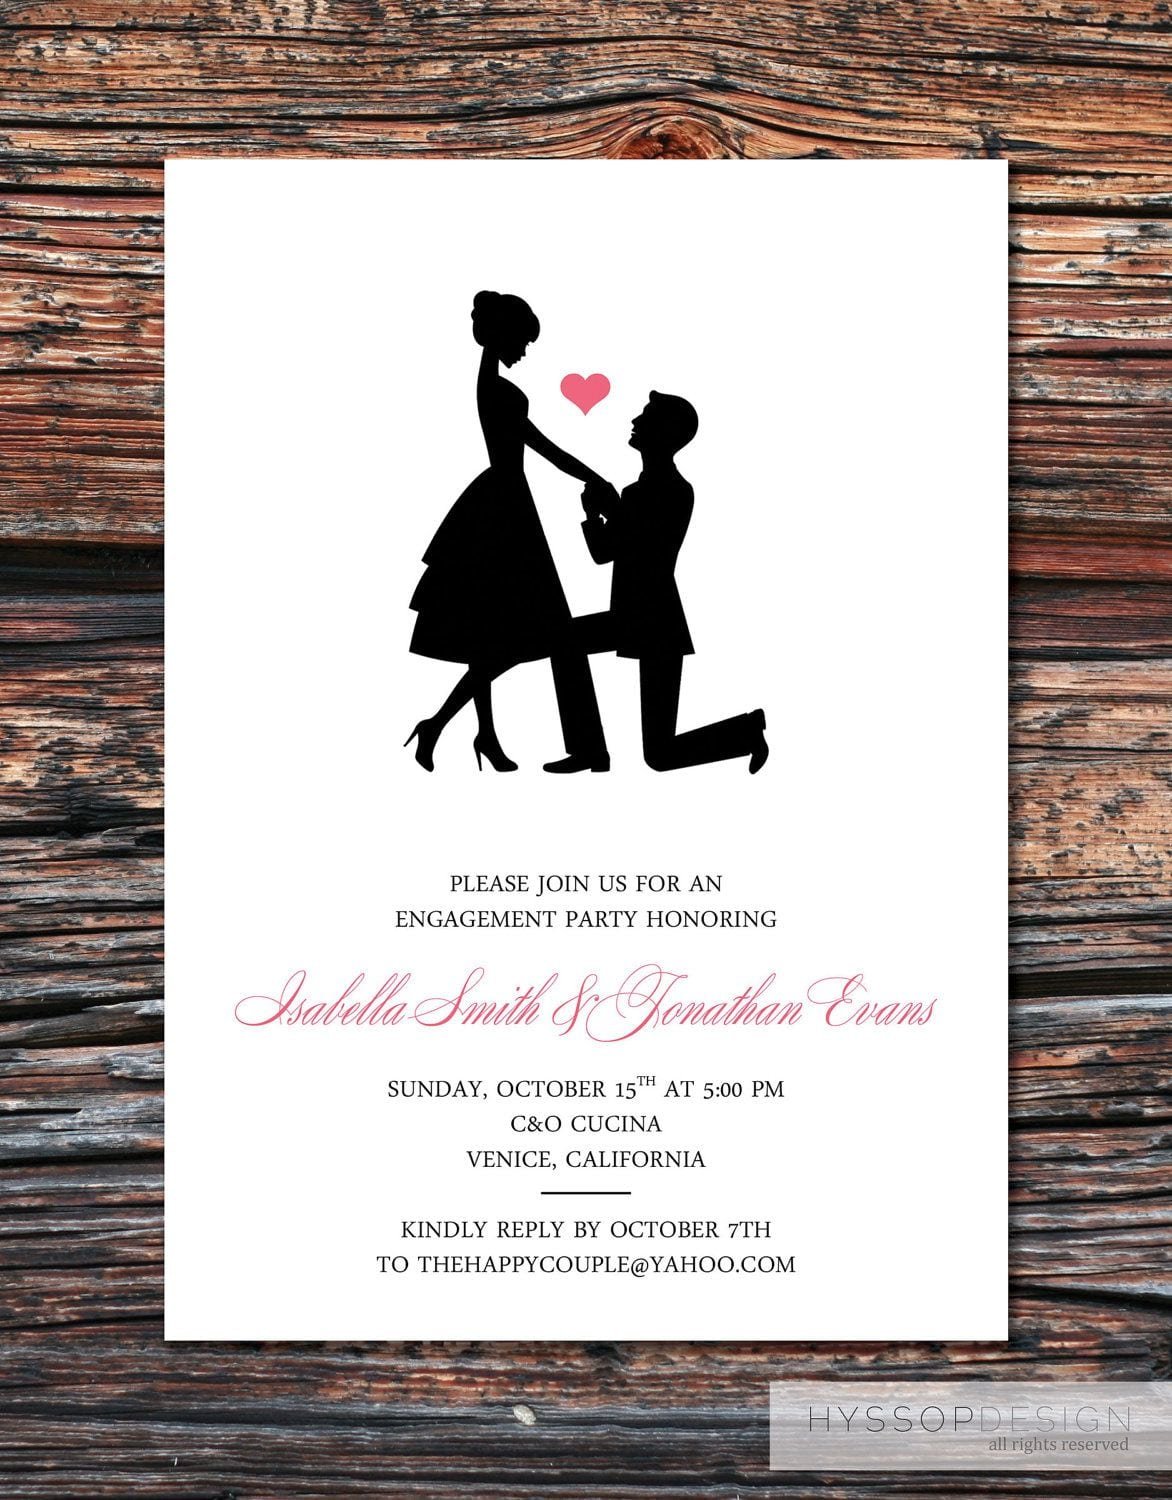 Engagement Party Invitation Template Free from www.itbof.com